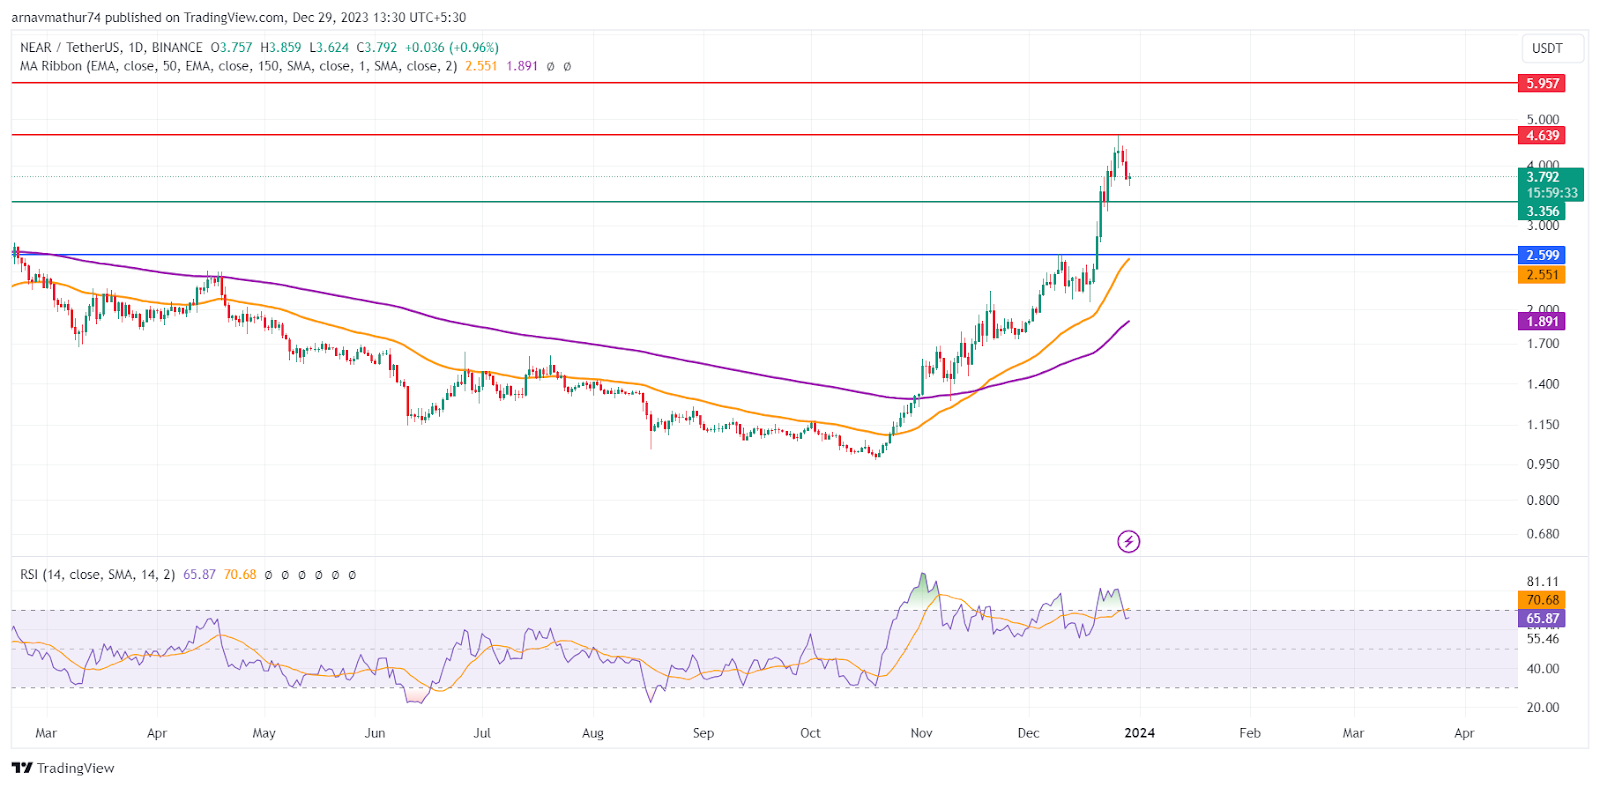 NEAR Coin Analysis: Investors Shouldnt Miss This Major Breakout